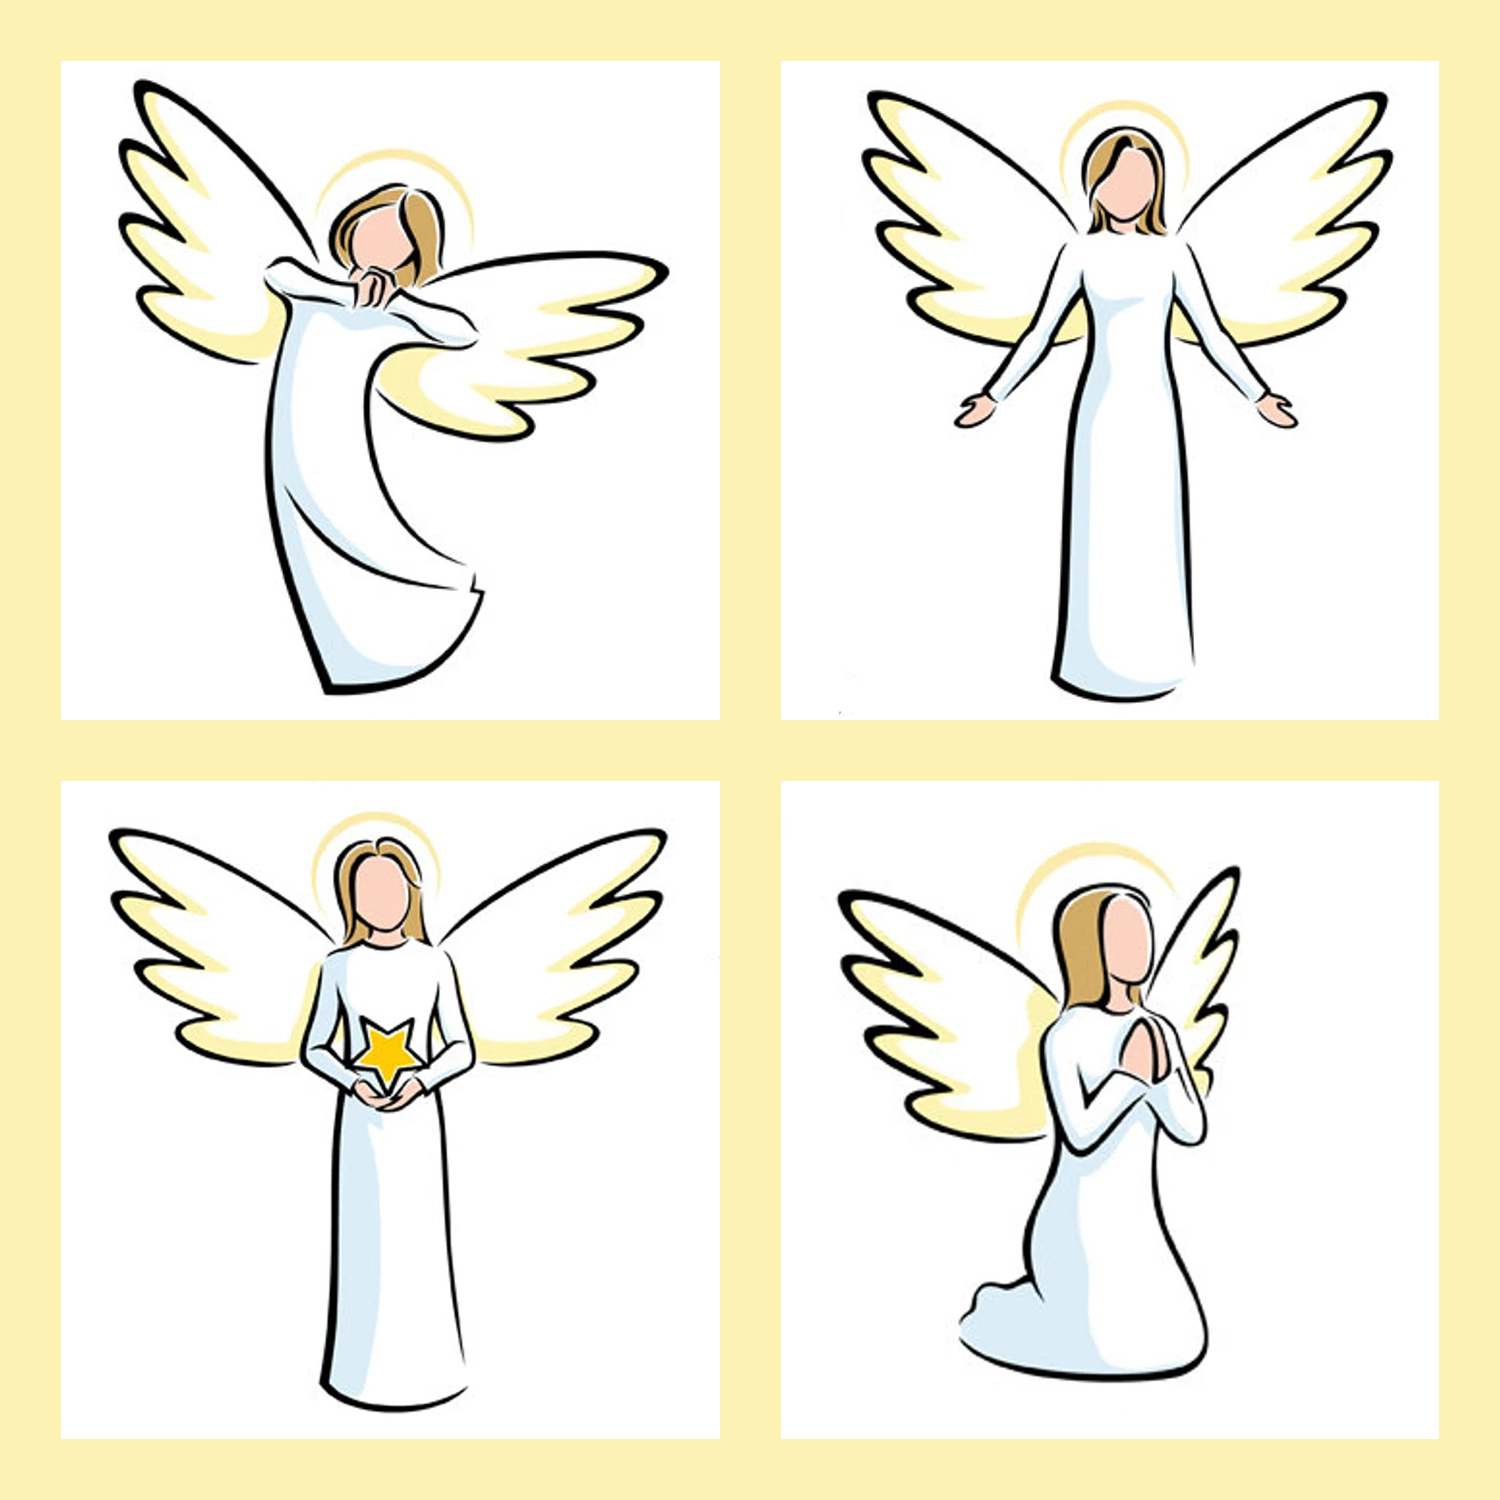 Angels vector cartoon clipart illustration preview.